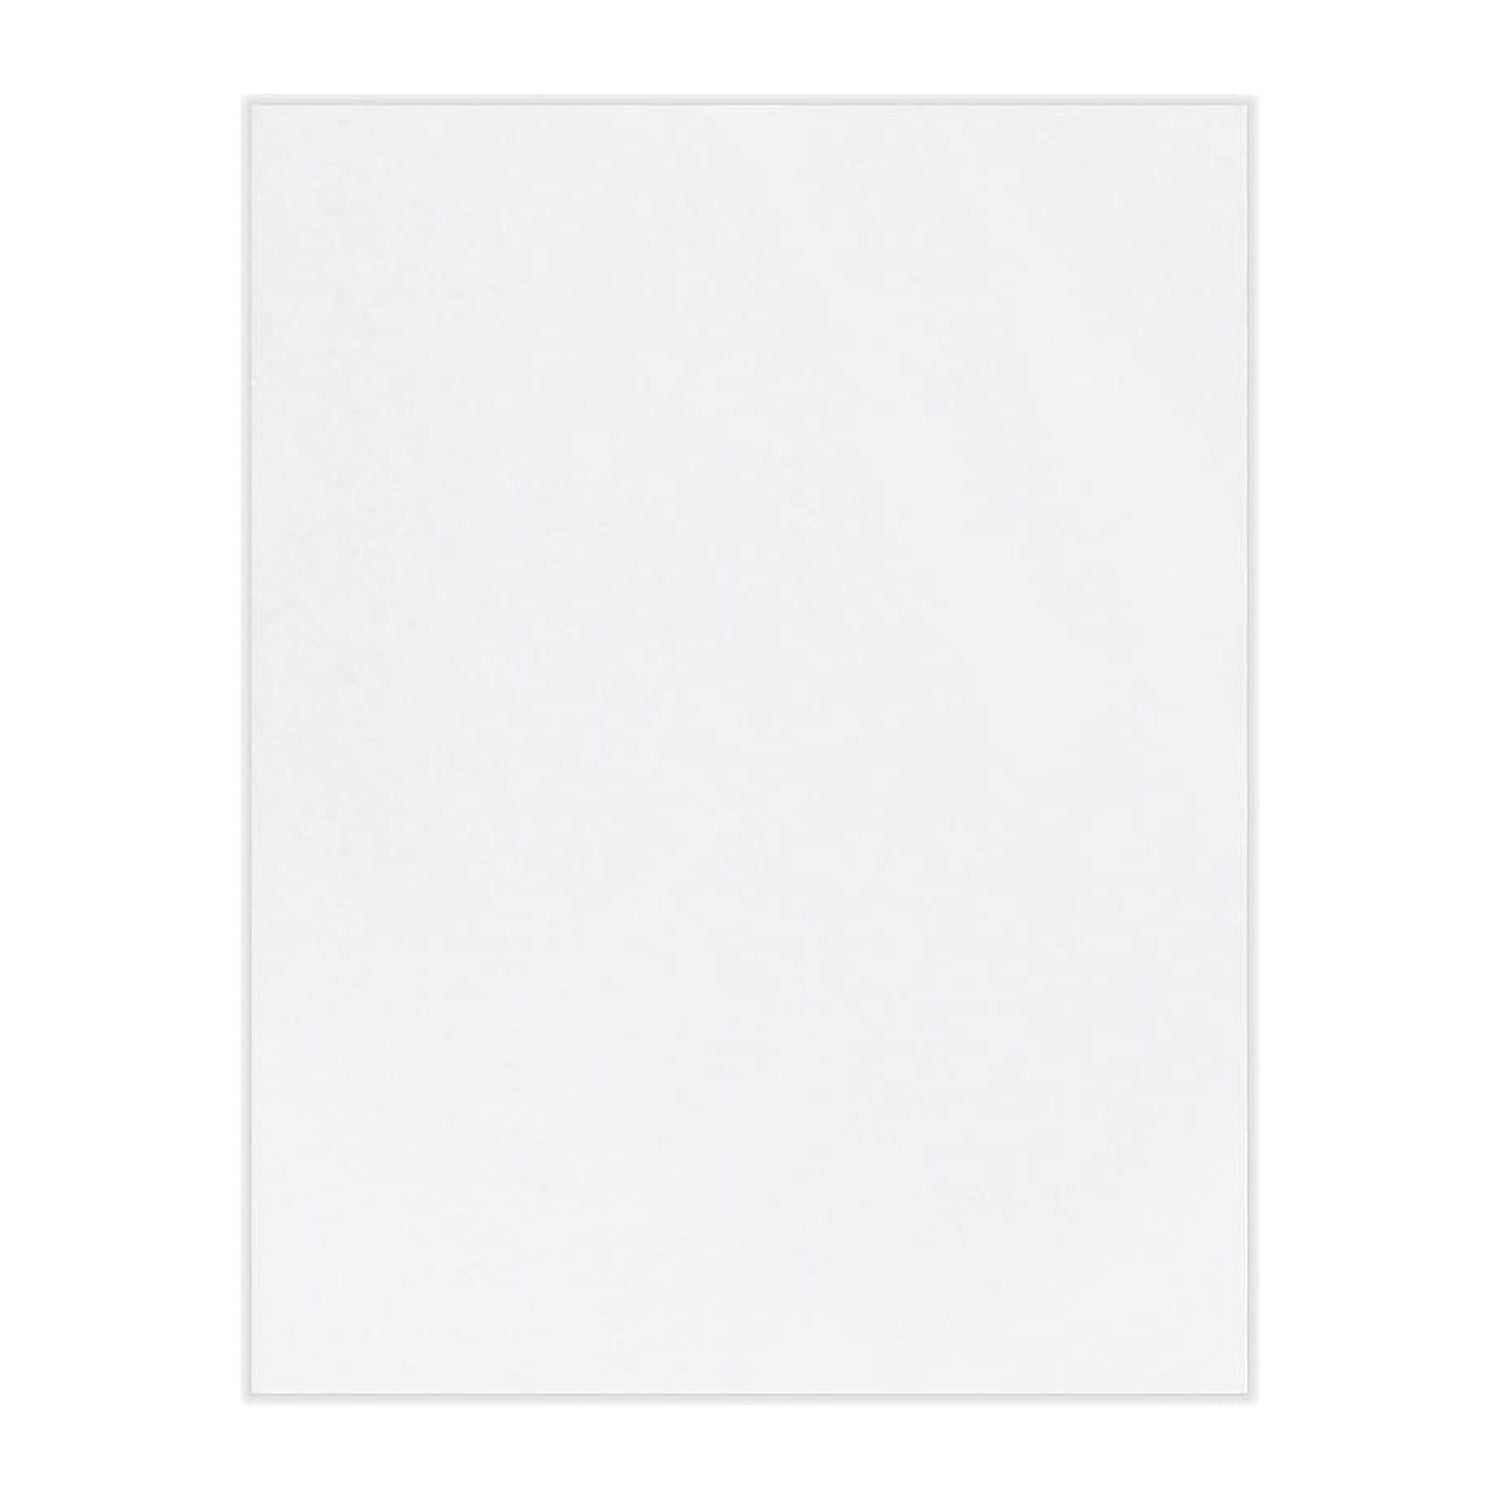 Lux 80 lb. Cardstock Paper 8.5 x 11 Bright White 250 Sheets/Pack